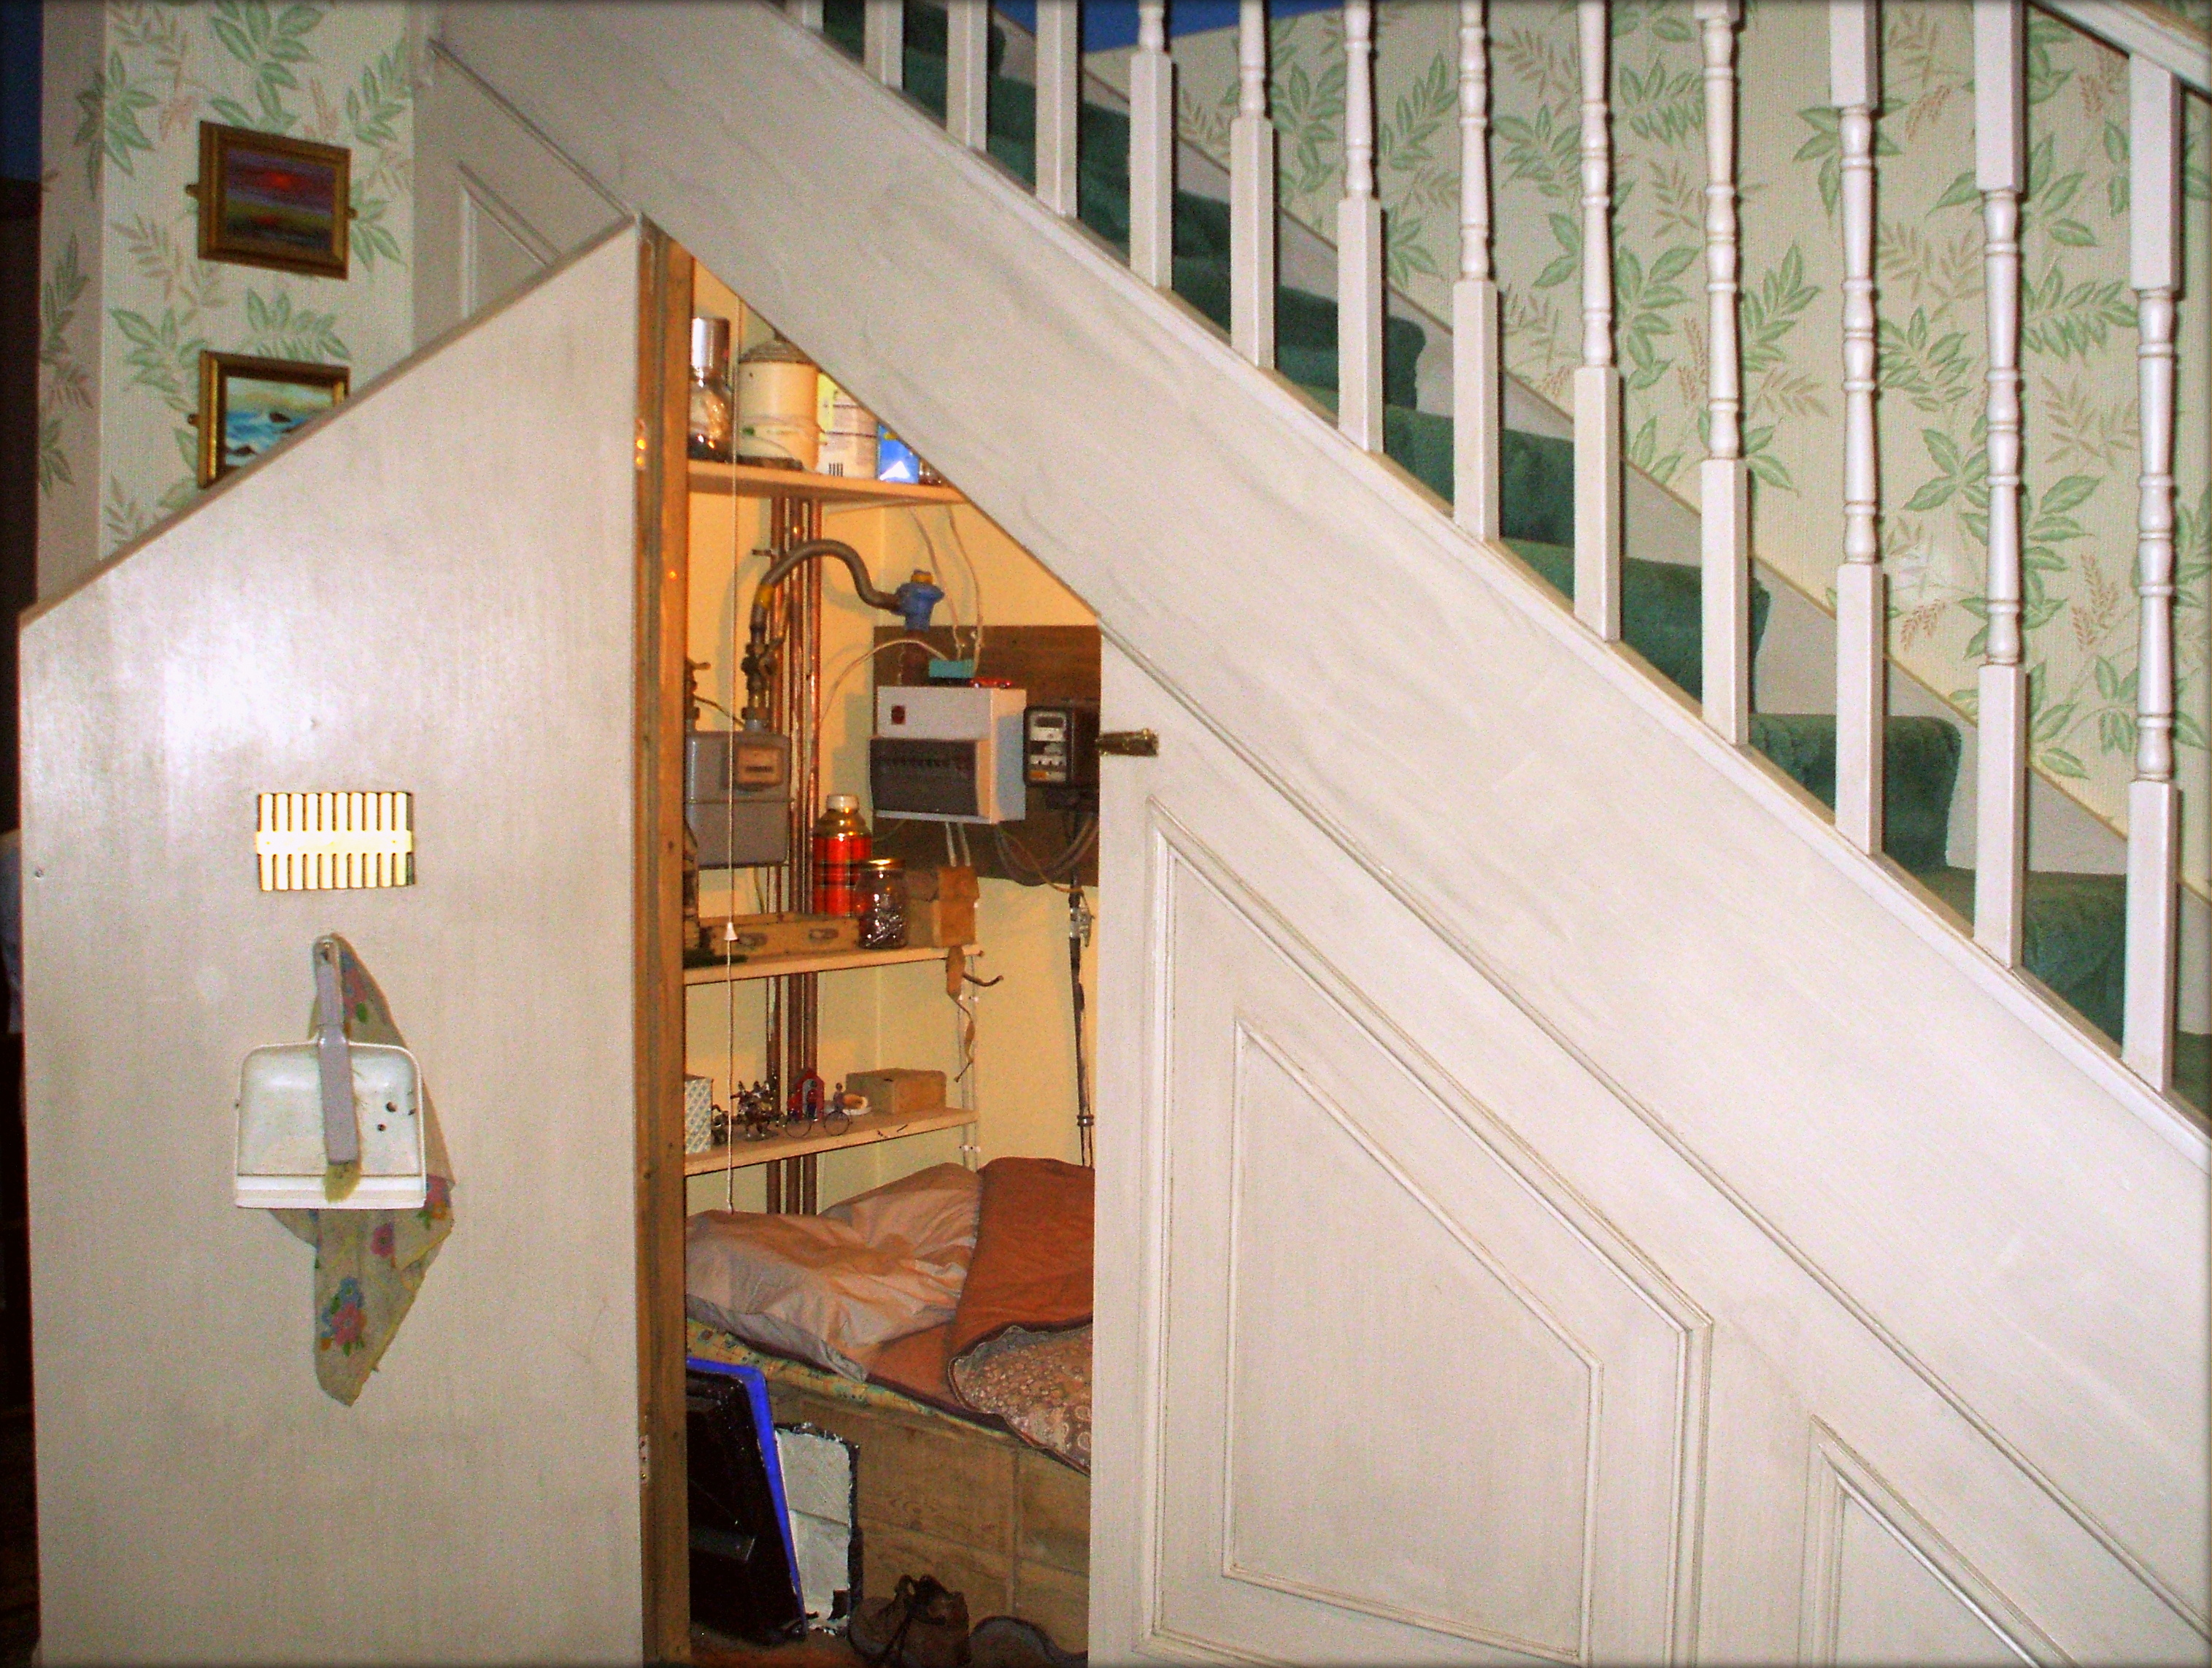 File:Under the stairs, No 4 Privet Drive.jpg - Wikimedia Commons